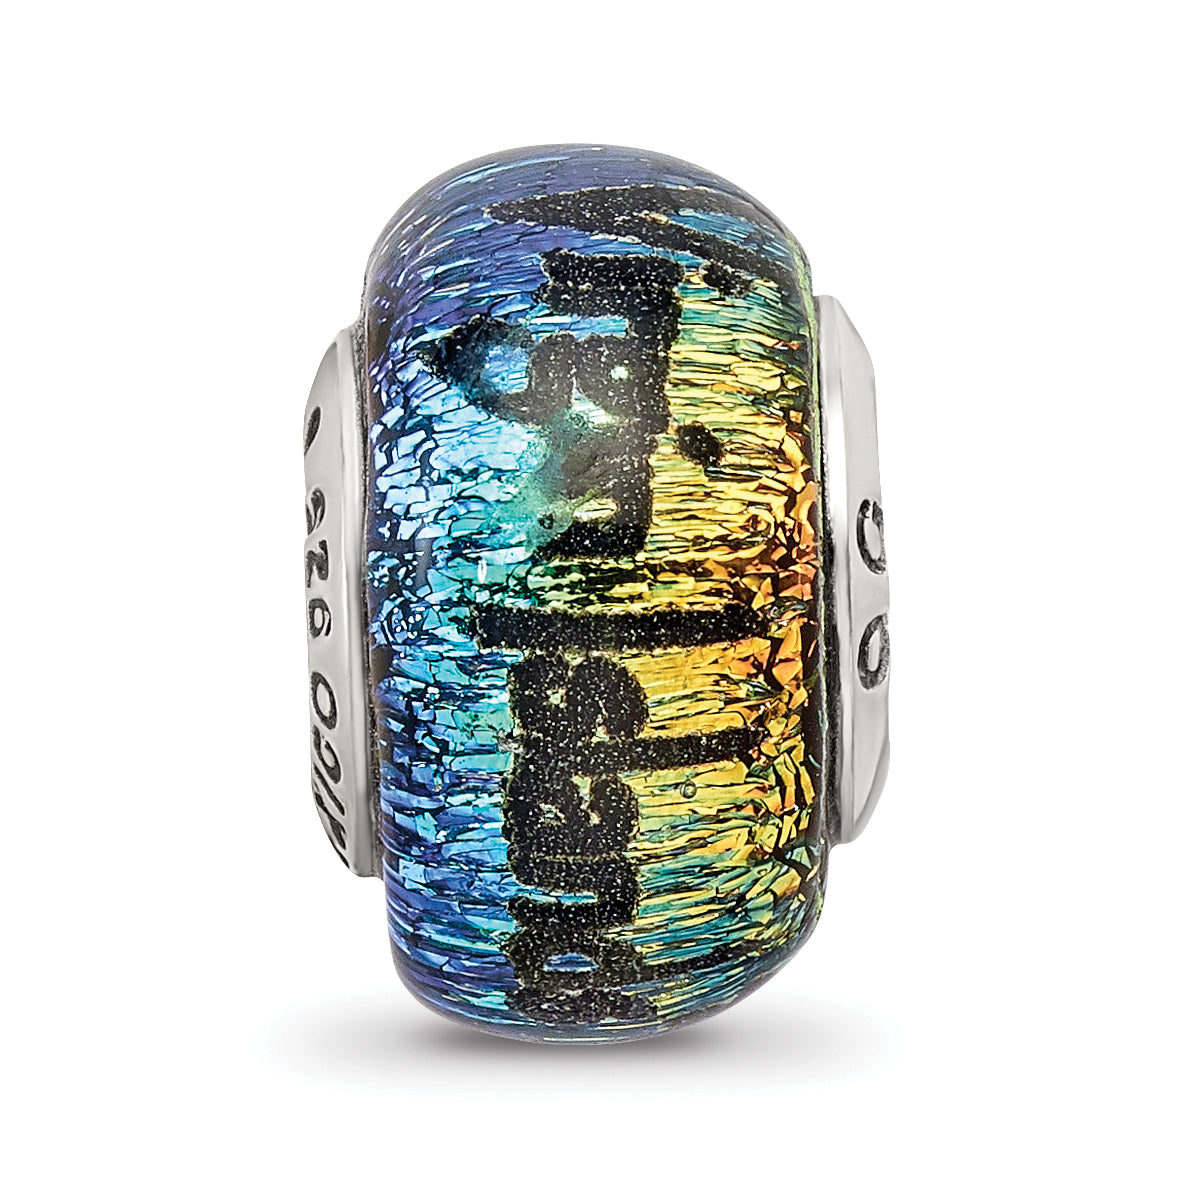 Sterling Silver Reflections Virgin Islands Orange Dichroic Glass Bead